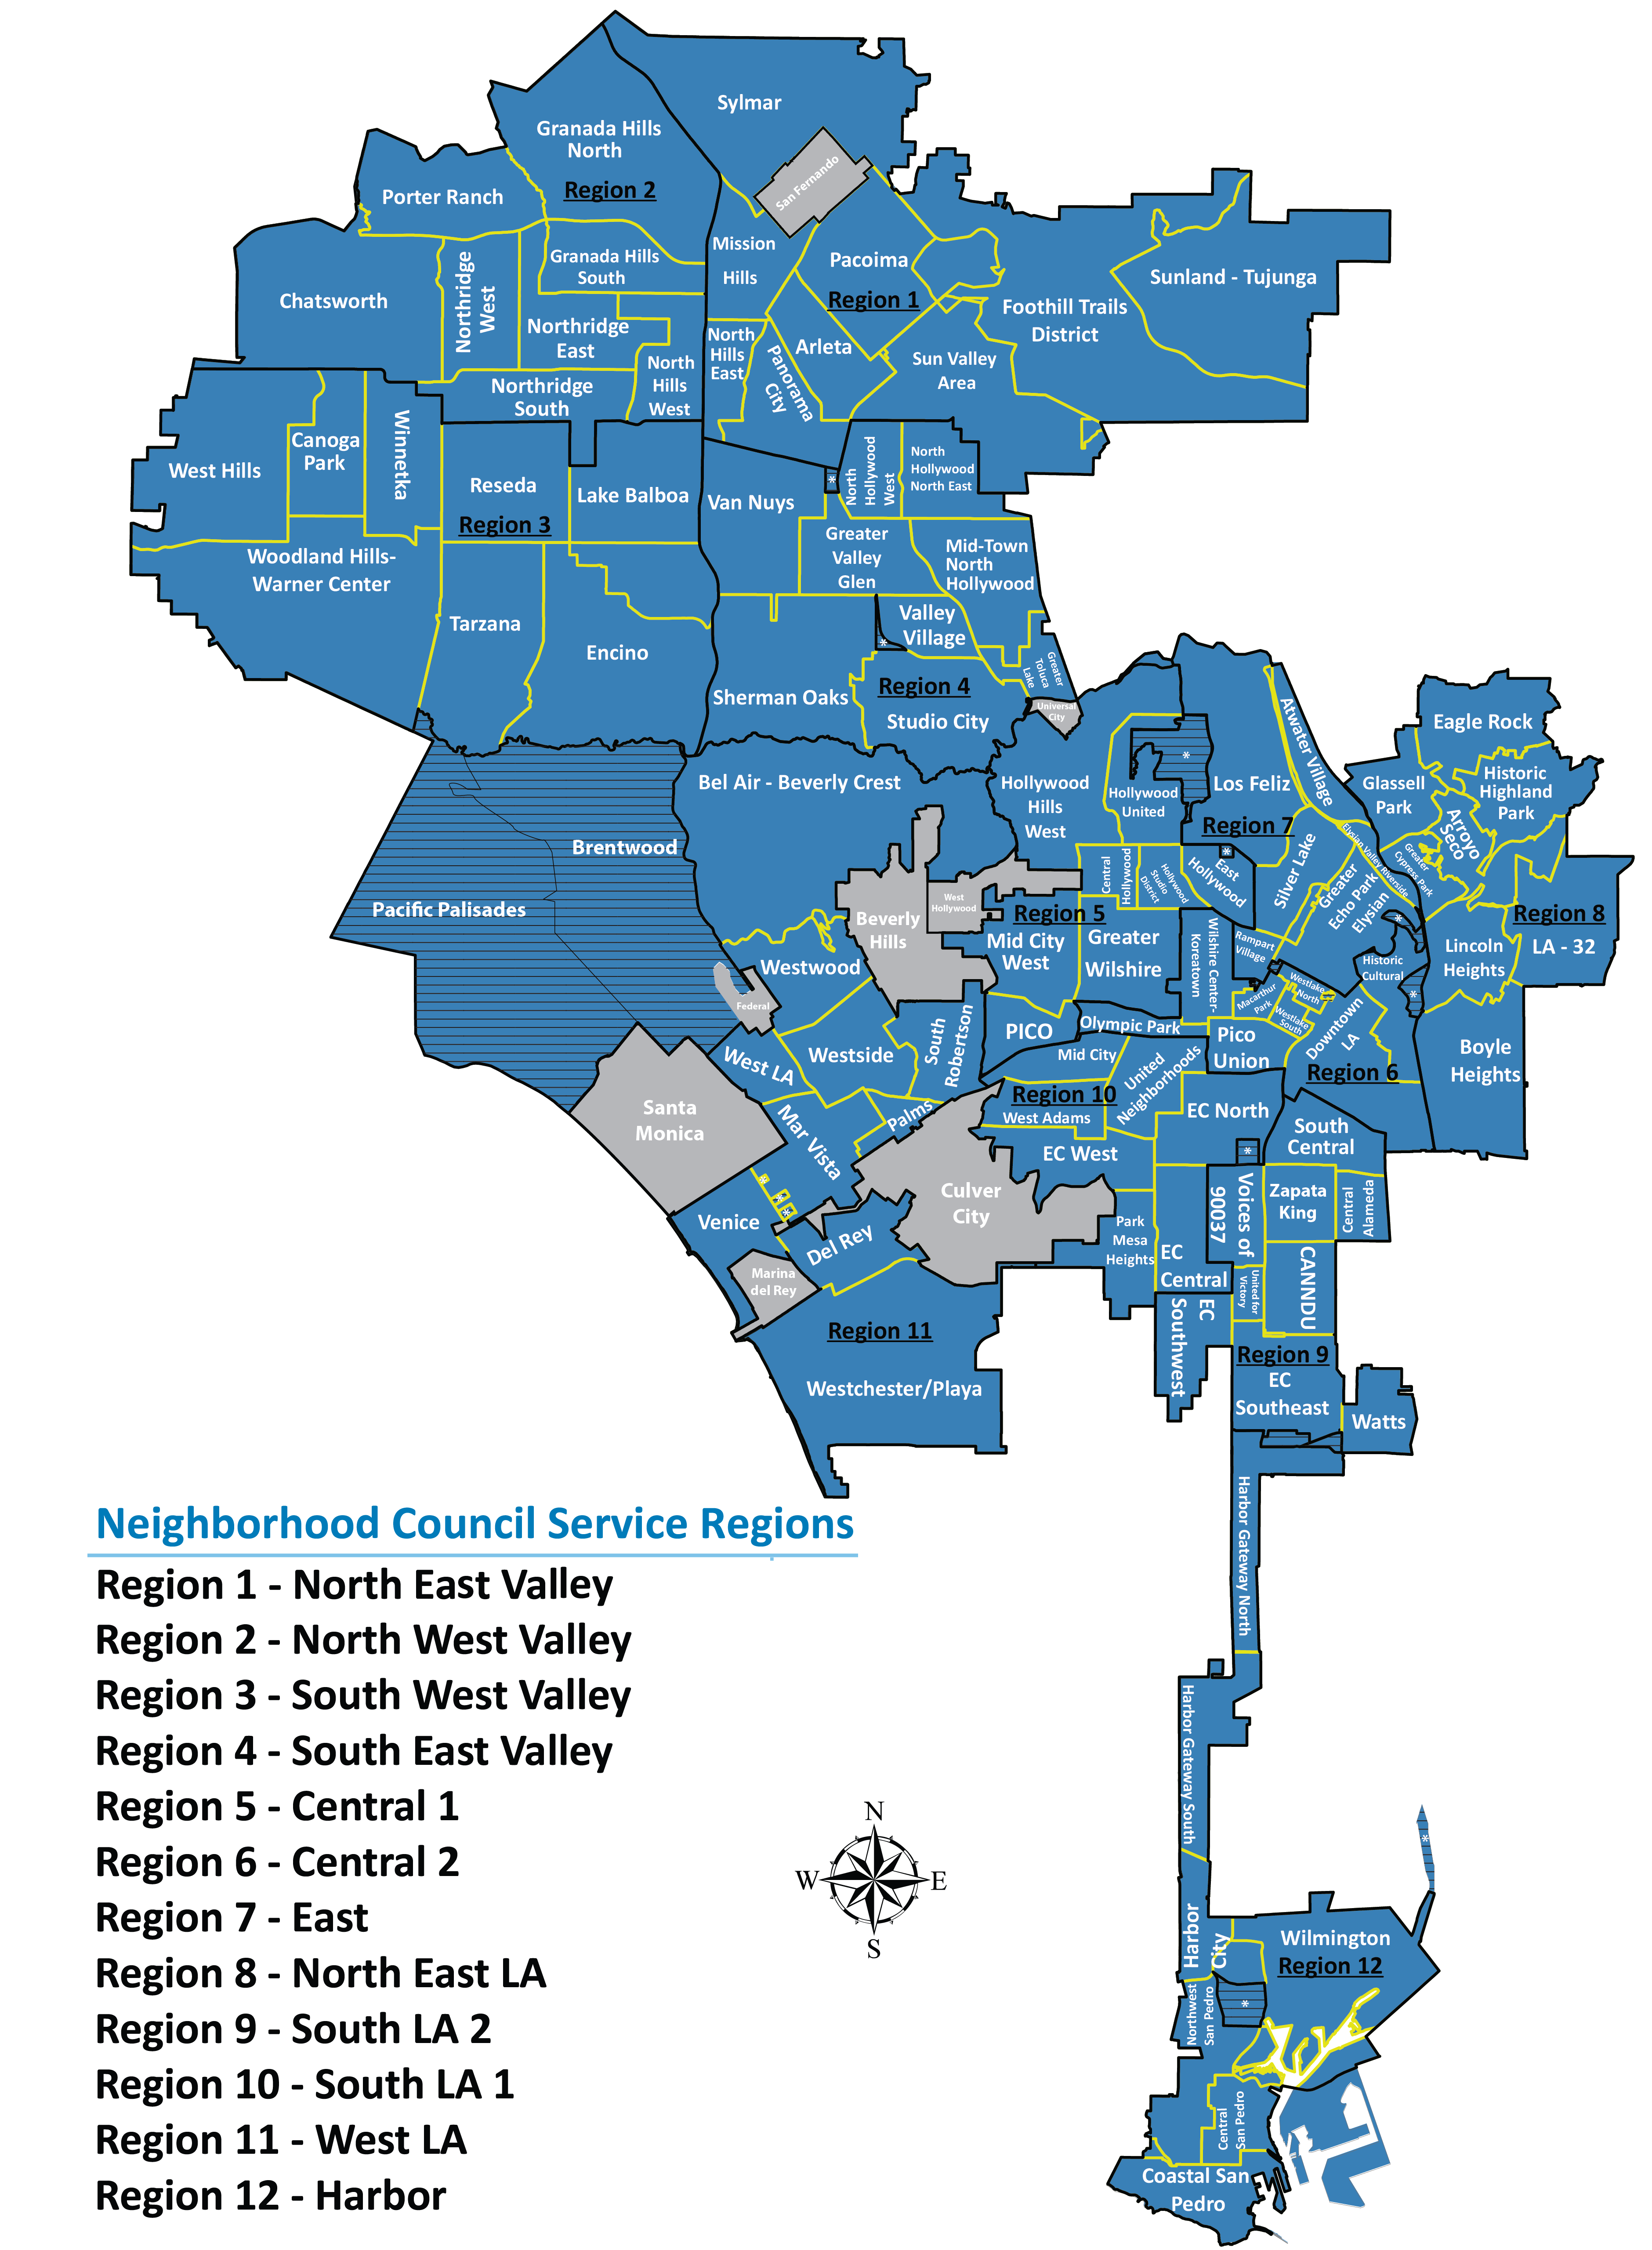 Los Angeles City Council District Map Maping Resources